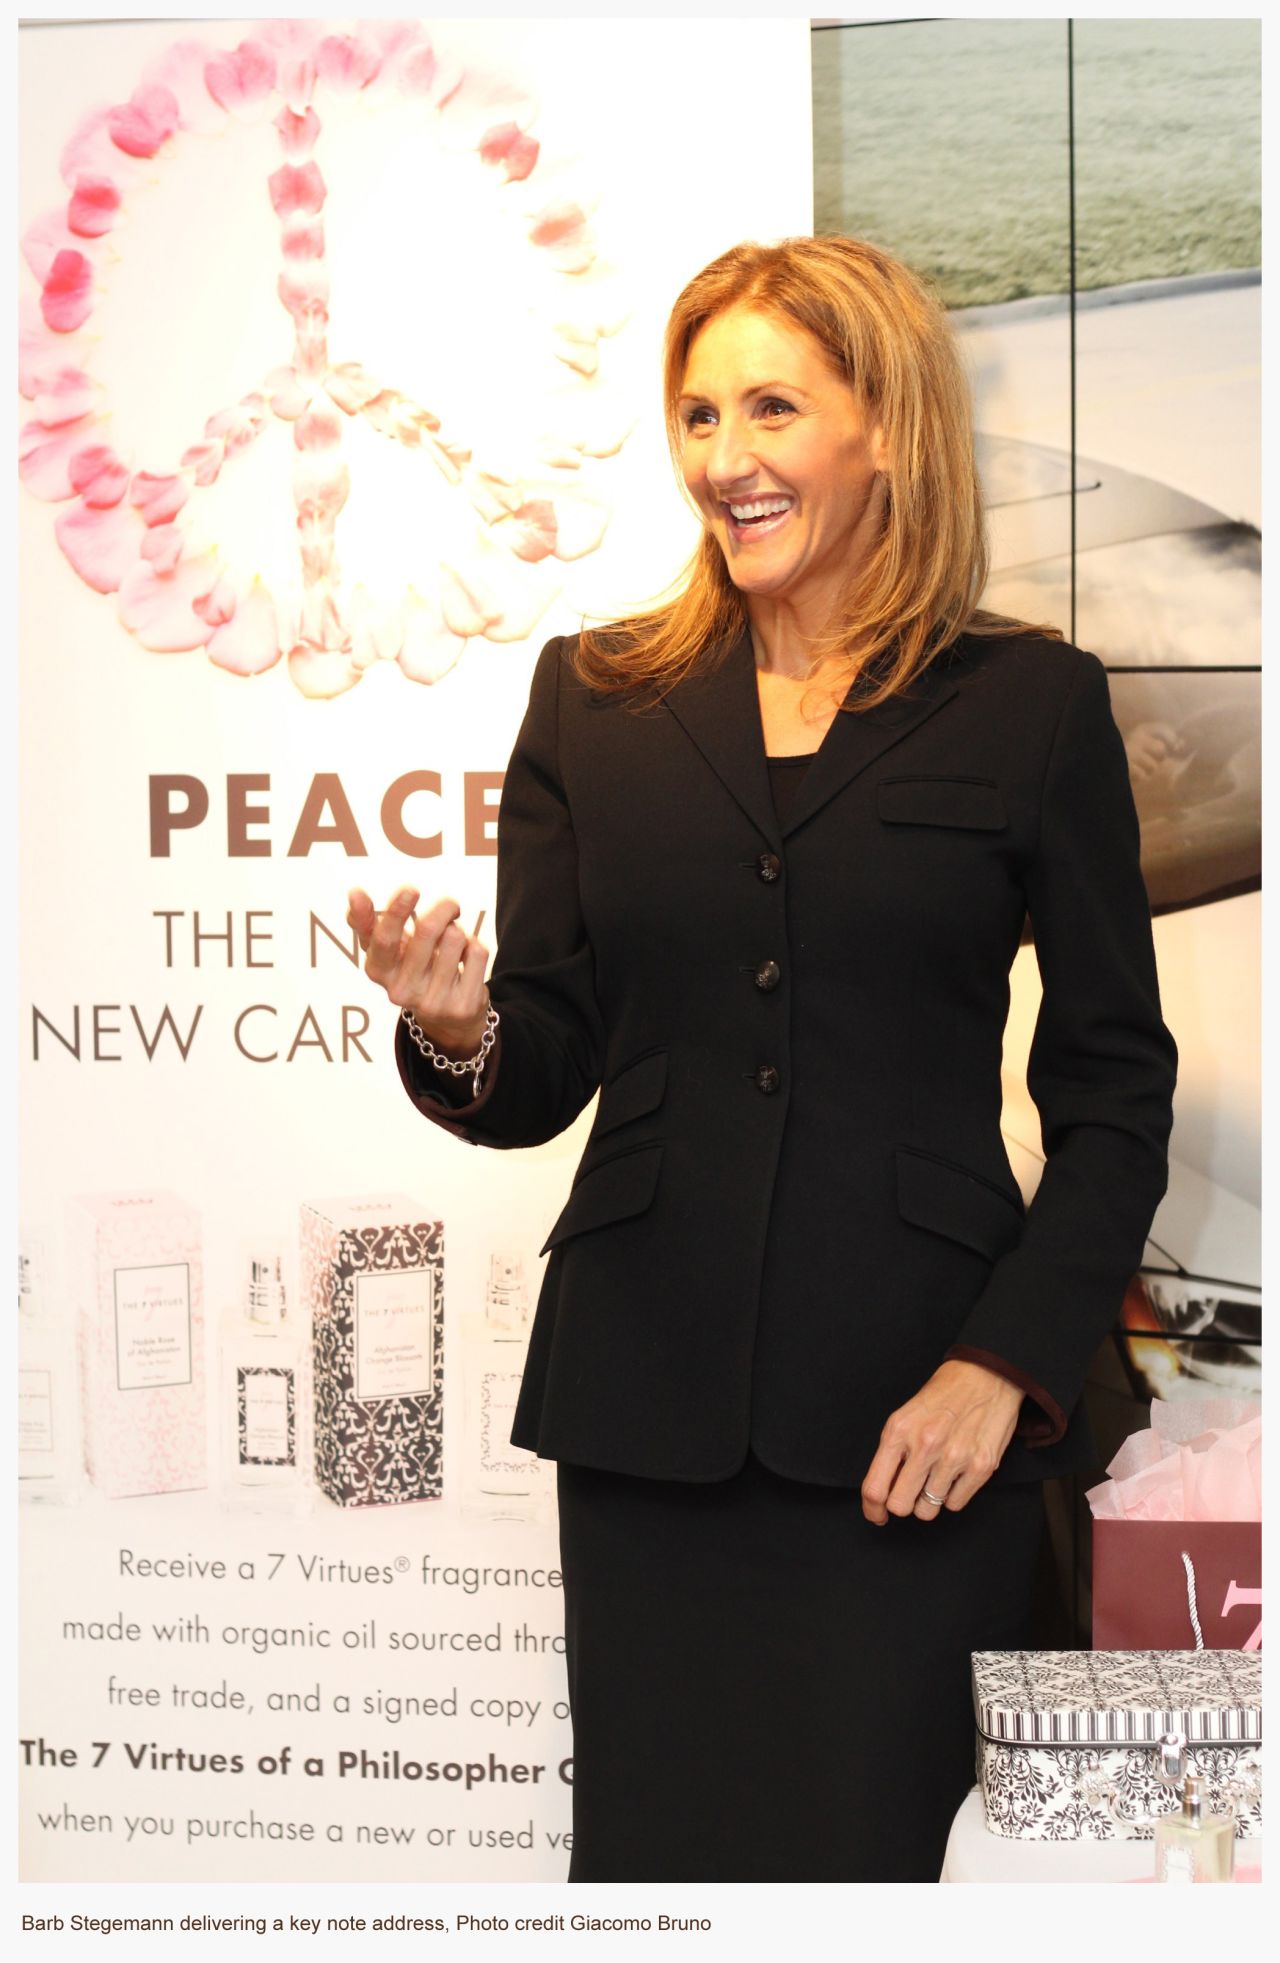 Entrepreneur Barb Stegemann speaking at a fragrance launch. She is also an author and motivational speaker. 